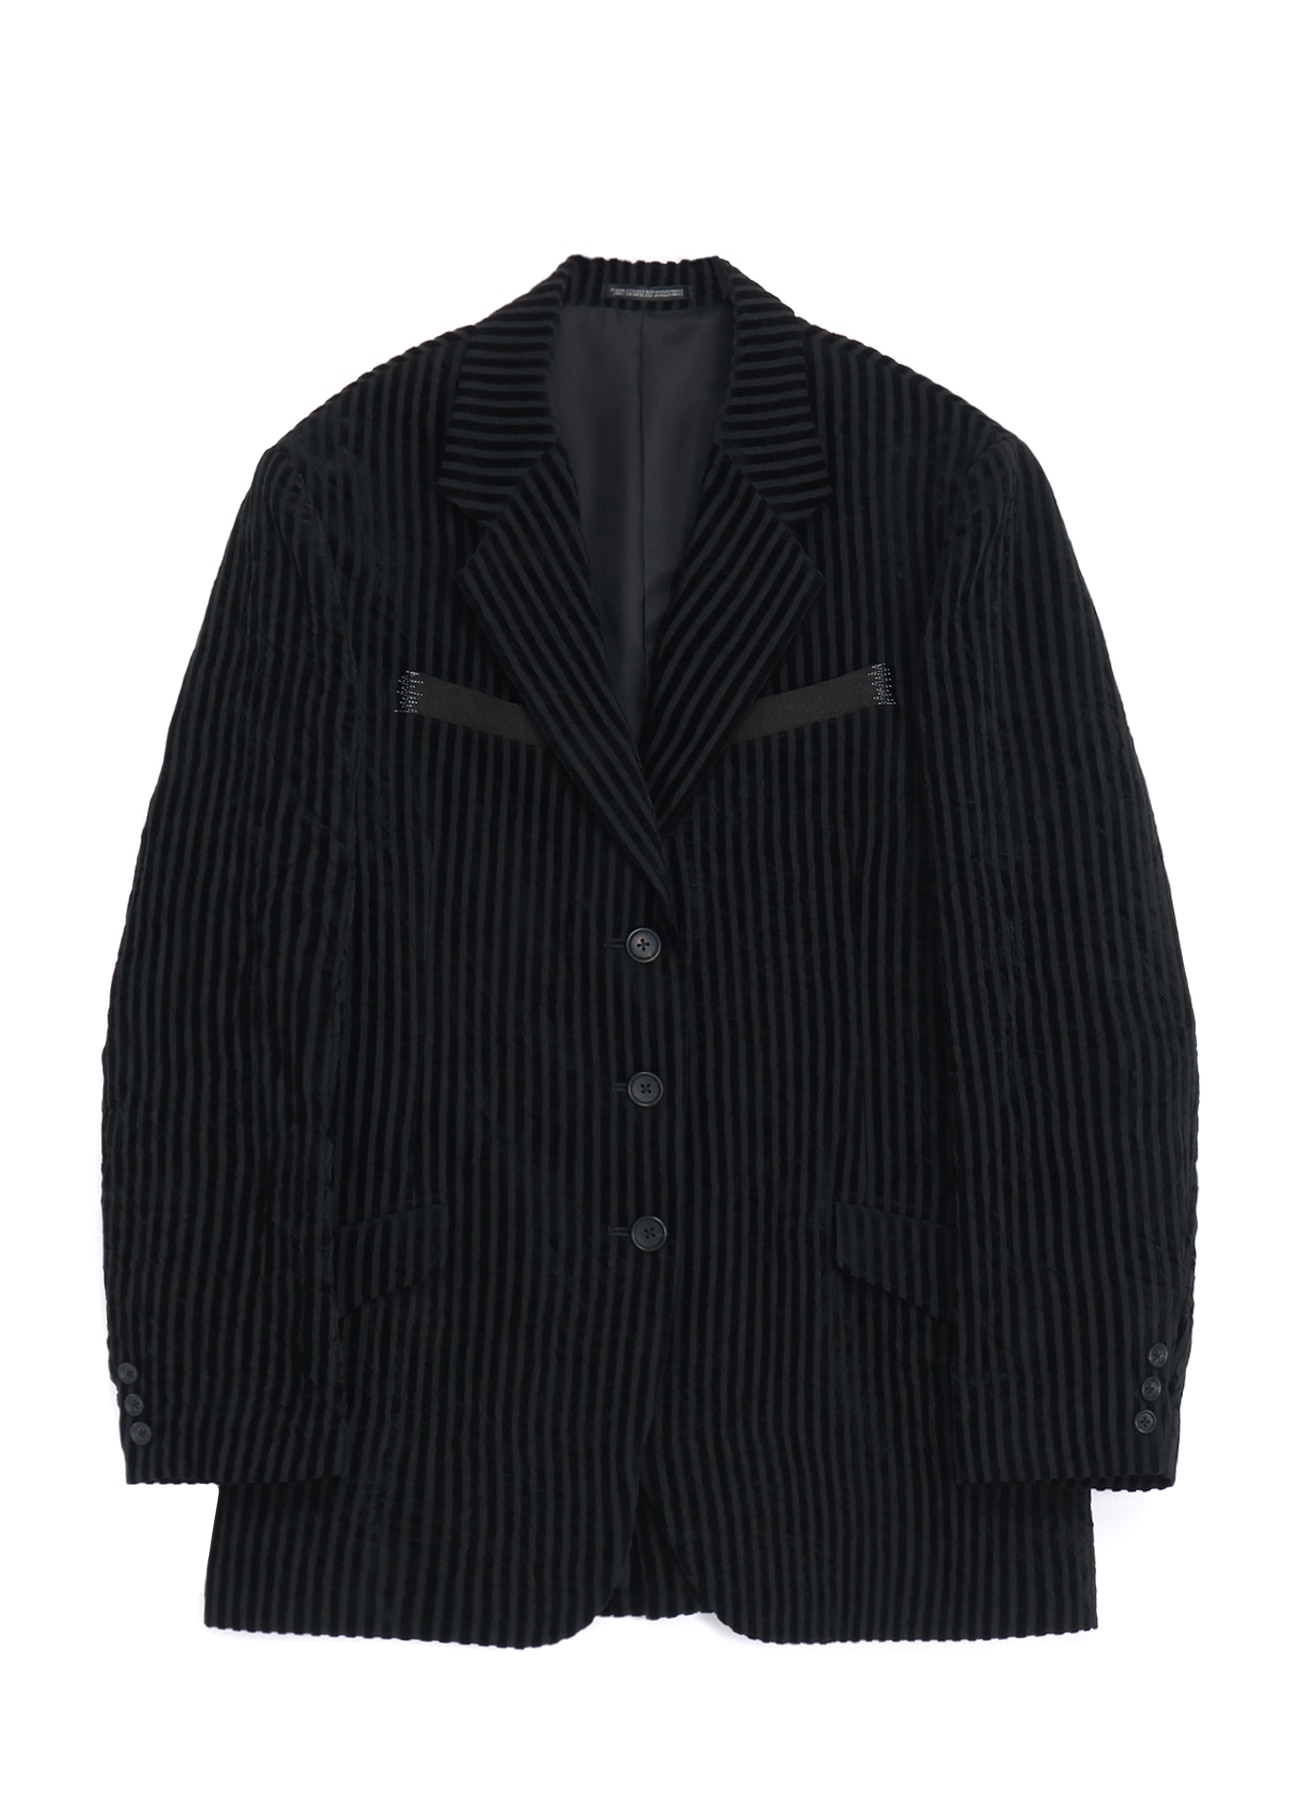 WRINKLED STRIPED 3-BUTTON JACKET WITH PEAK LAPELS